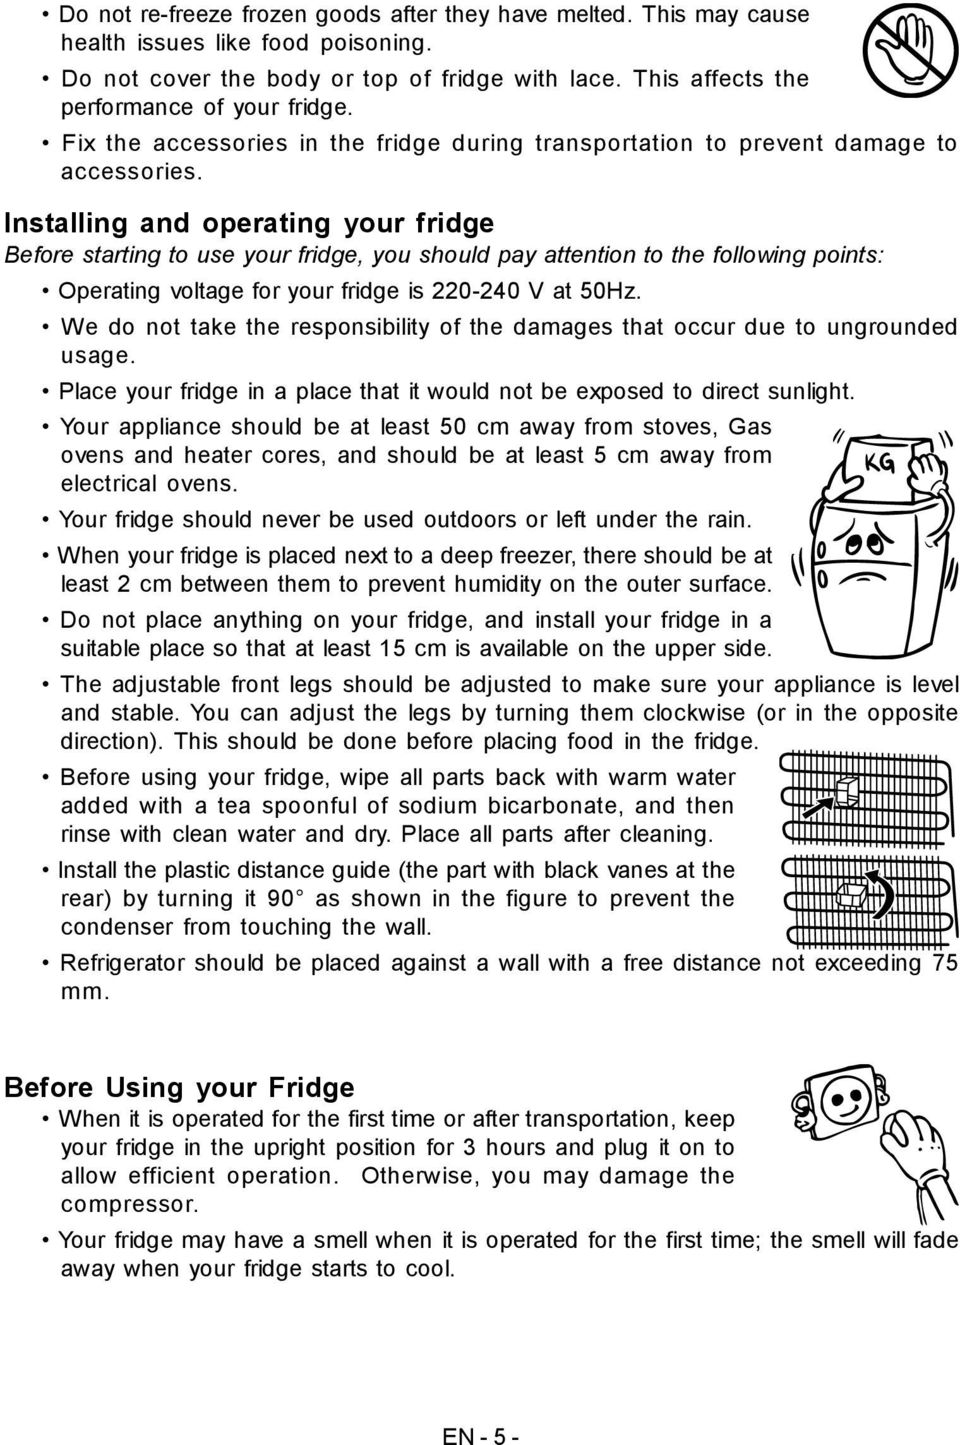 Installing and operating your fridge Before starting to use your fridge, you should pay attention to the following points: Operating voltage for your fridge is 220-240 V at 50Hz.